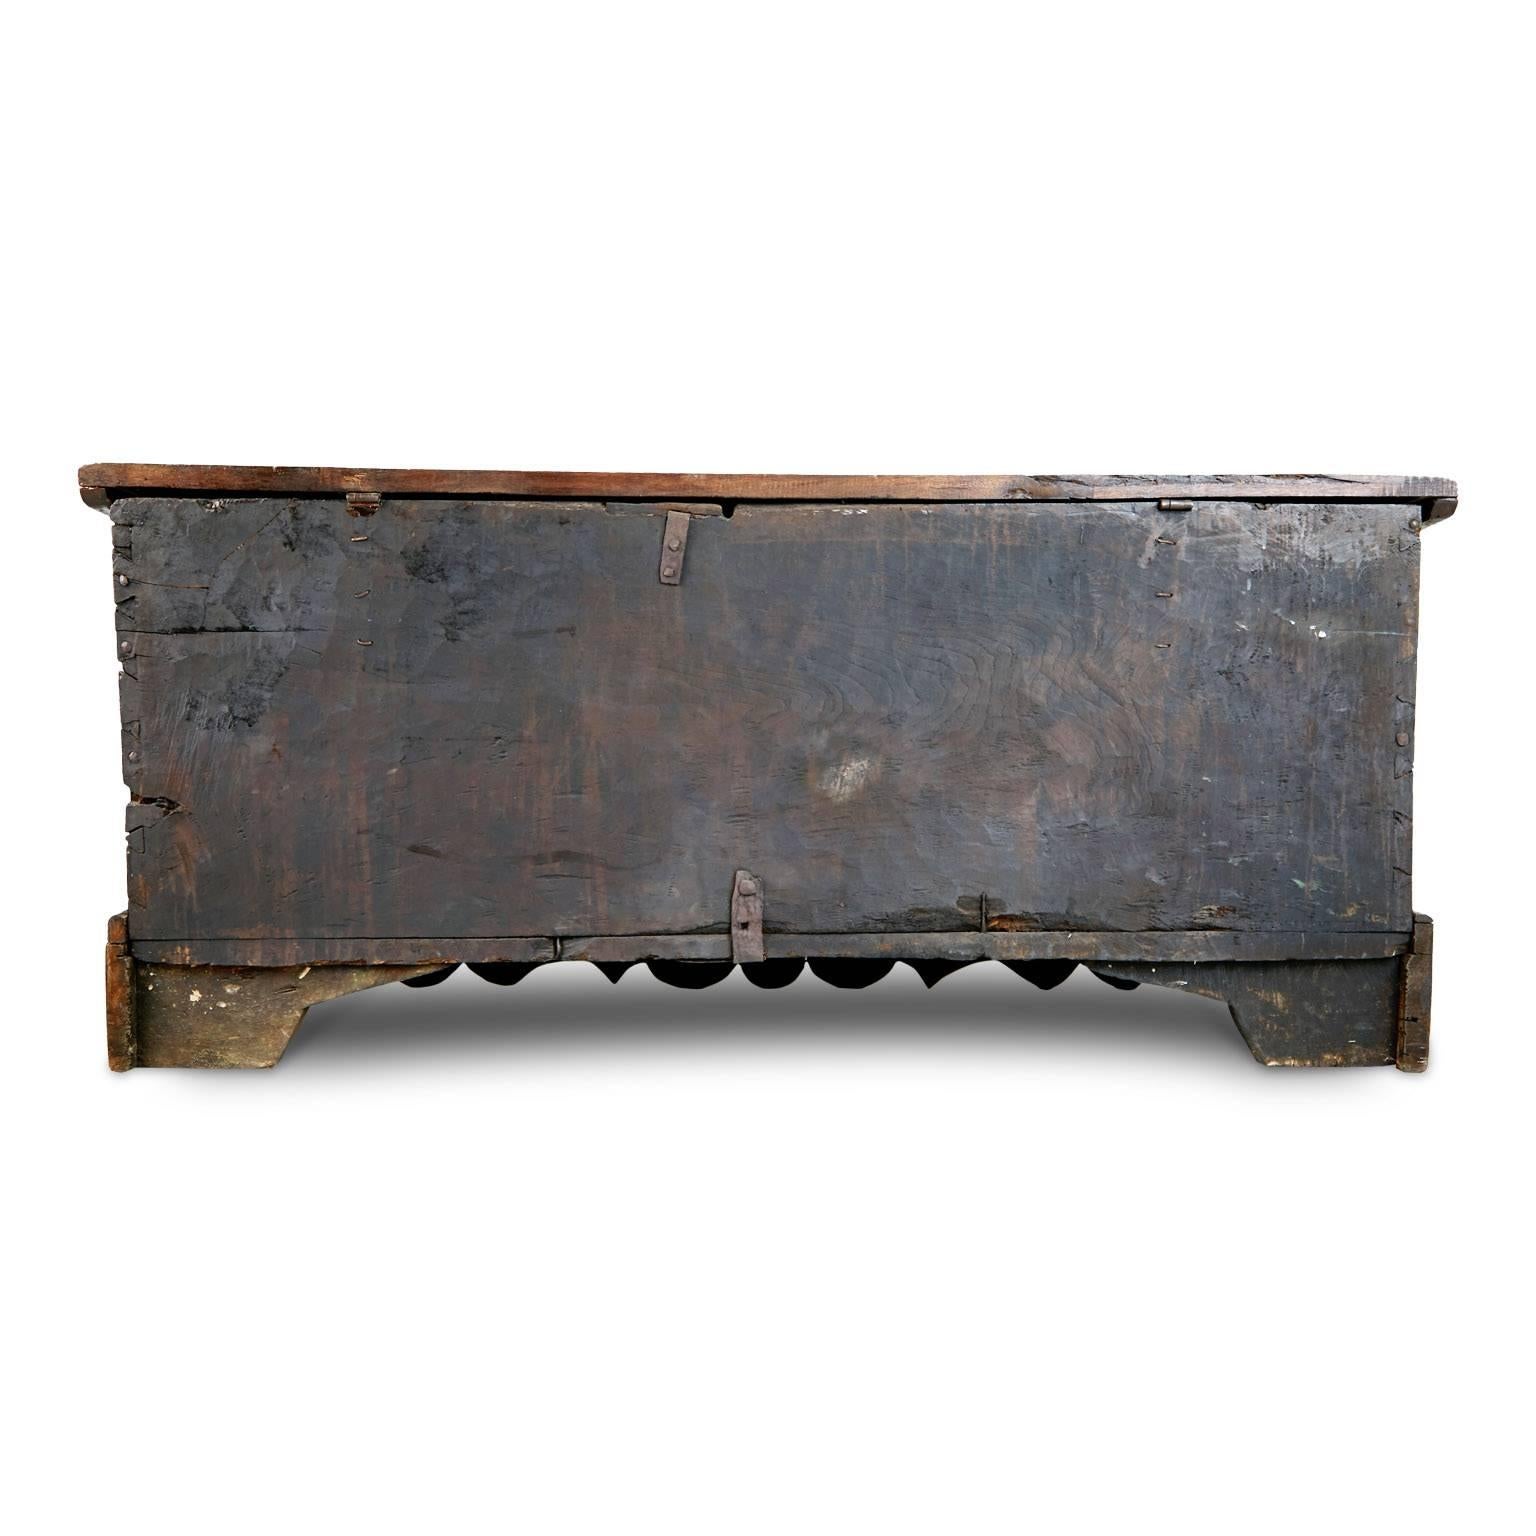 Add a real show stopper to your interior with this extremely large English Carolean chest or coffer, which can be used for blankets, bedding or other storage or display purposes. This striking piece is fabricated from hand carved oak and elm and is